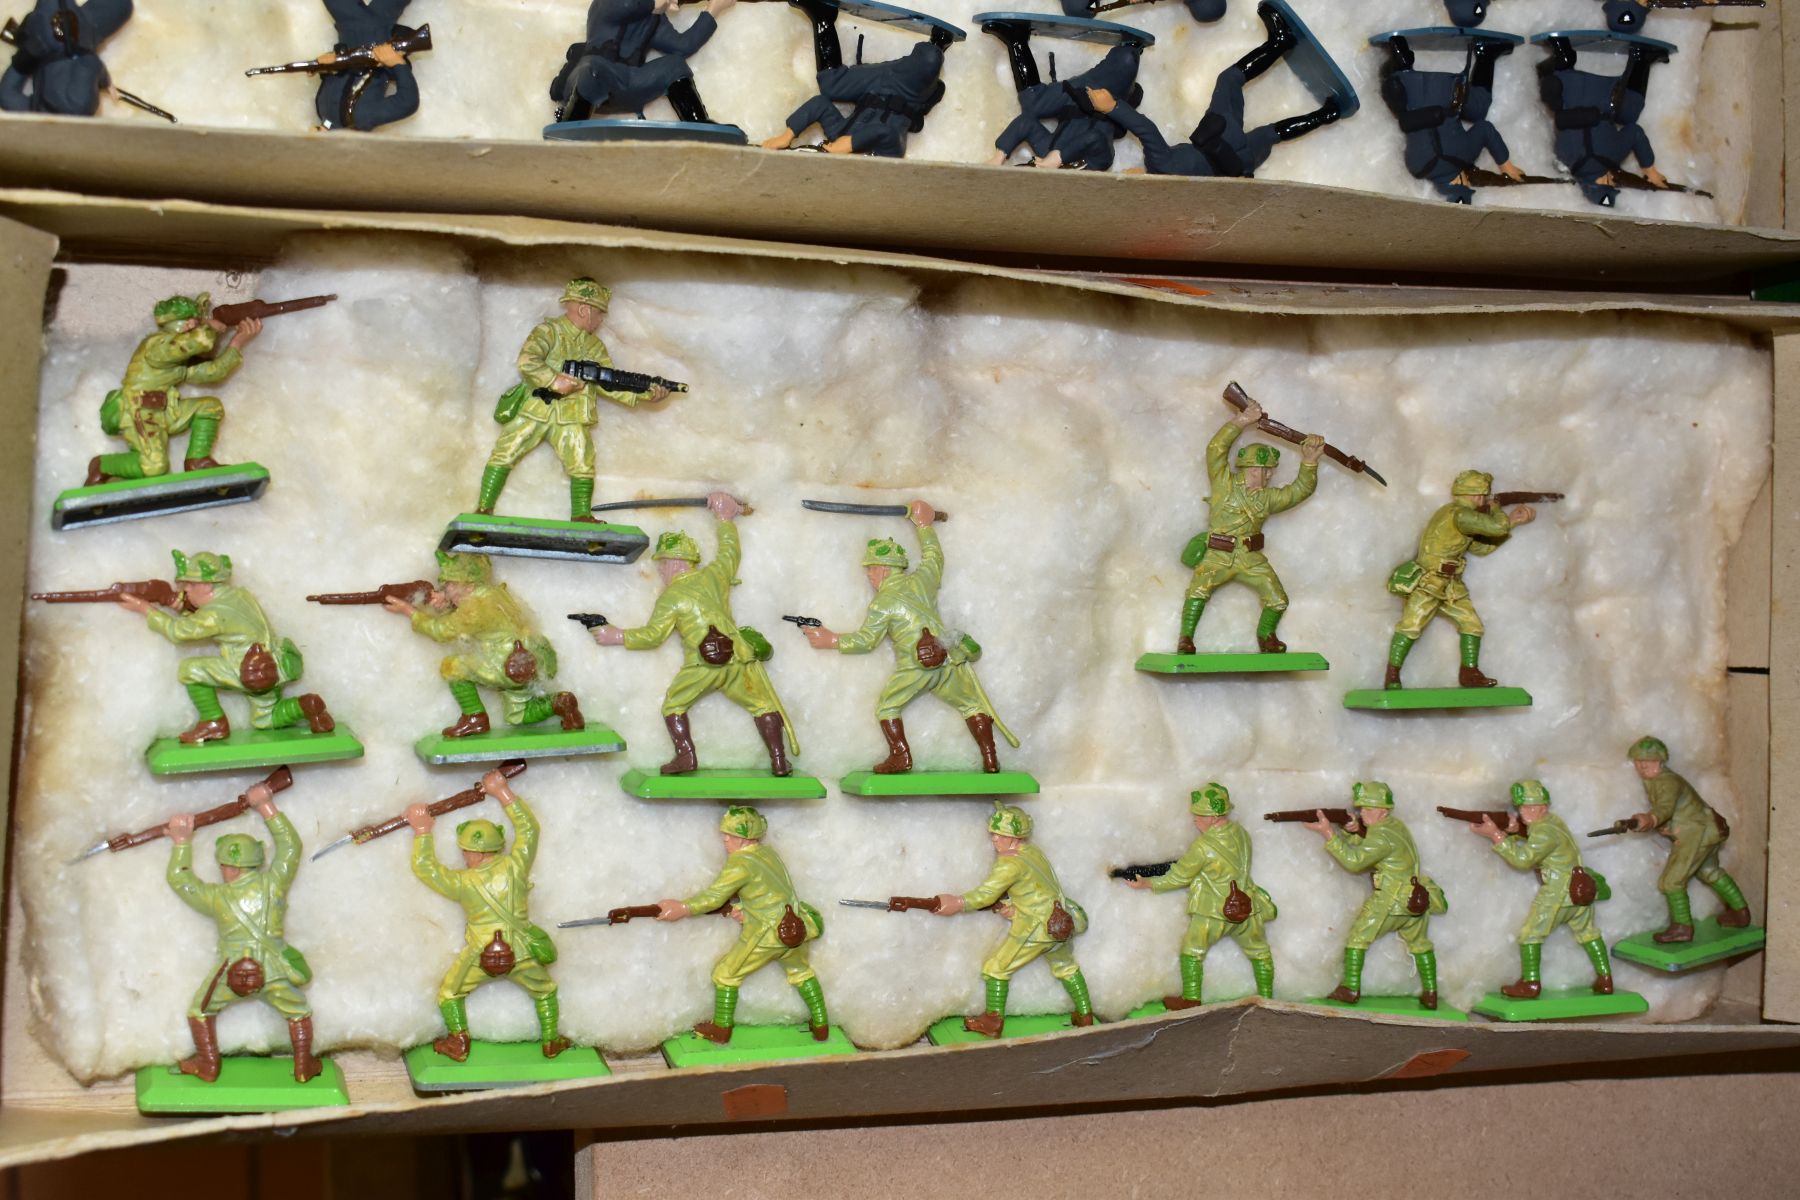 A QUANTITY OF BRITAINS AND AIRFIX 1/32 SCALE SOLDIER FIGURES, many have been painted and detailed to - Image 4 of 13